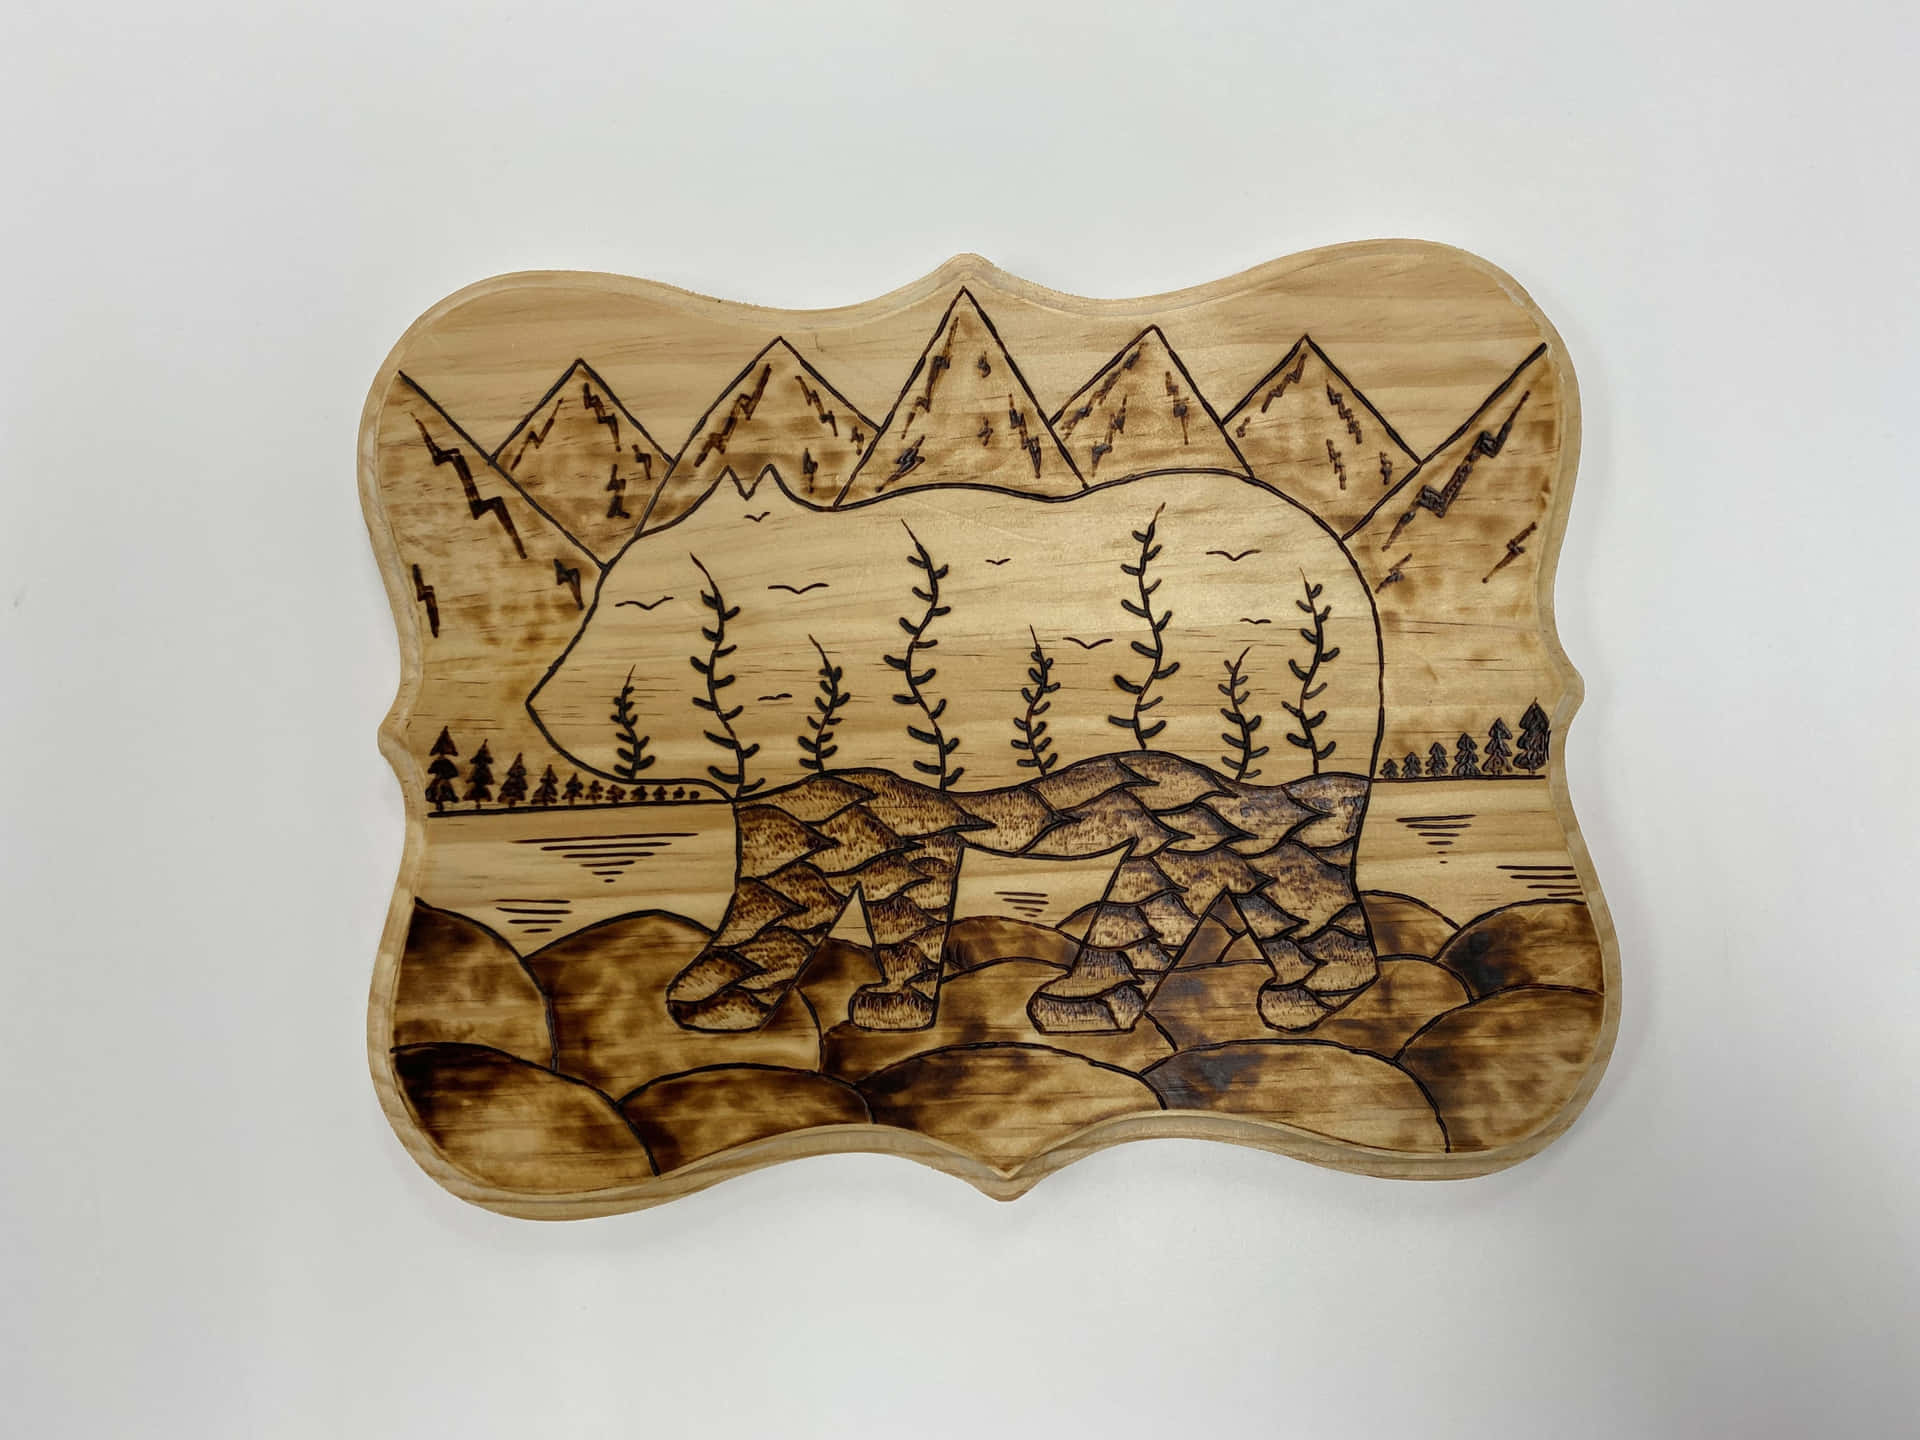 A Wooden Plate With A Bear And Mountains On It